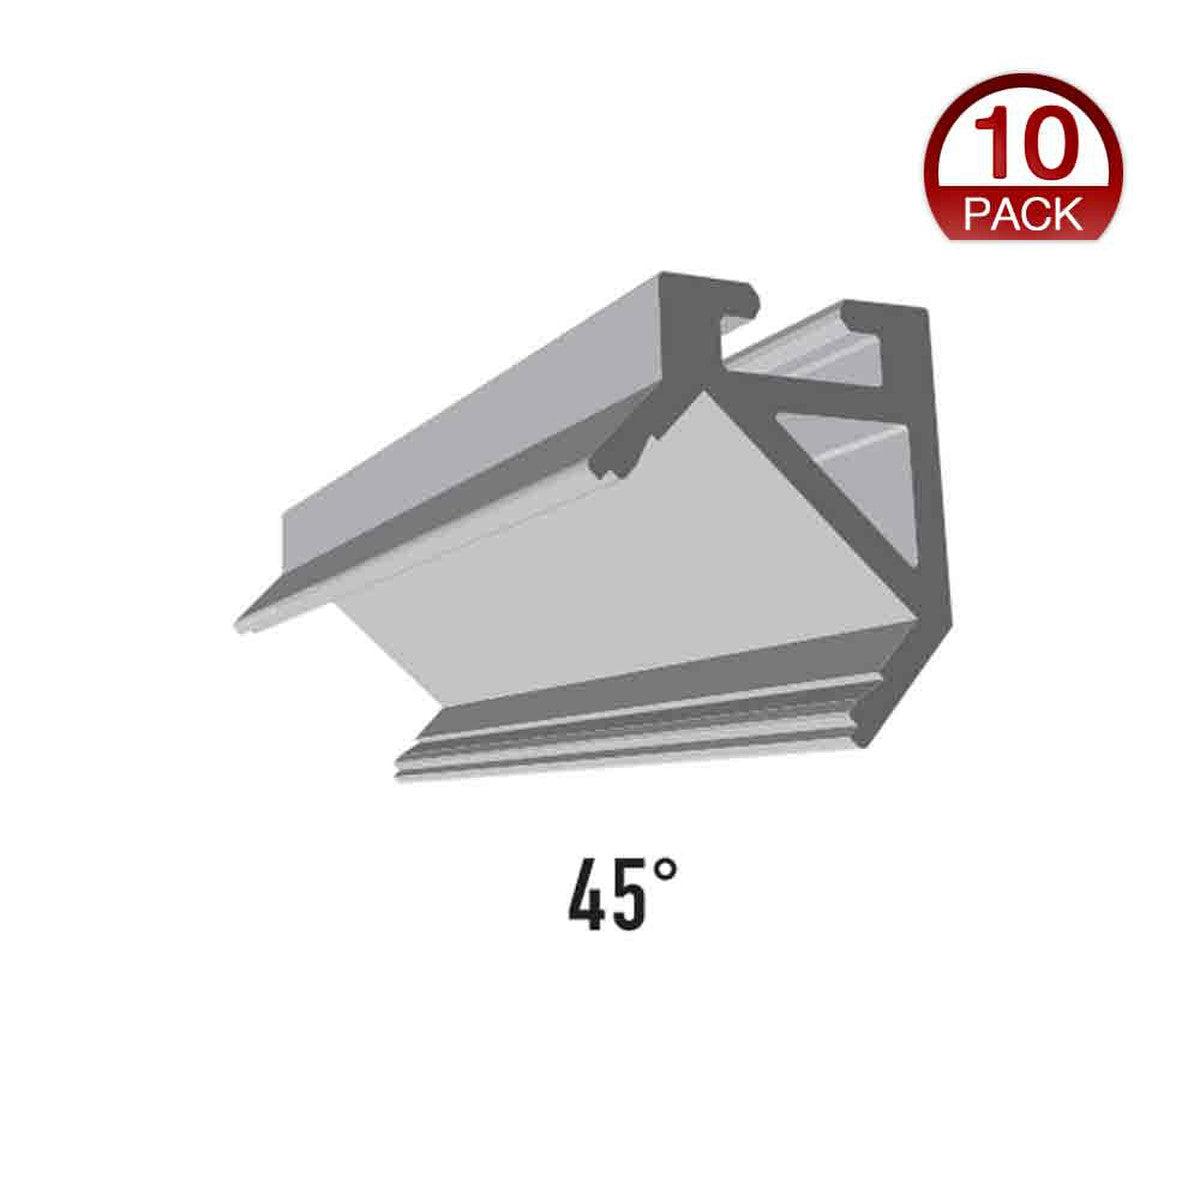 96in. Chromapath Builder, 45 degree LED channel, Corner, for Strips Up To 12mm, Black, Pack of 10